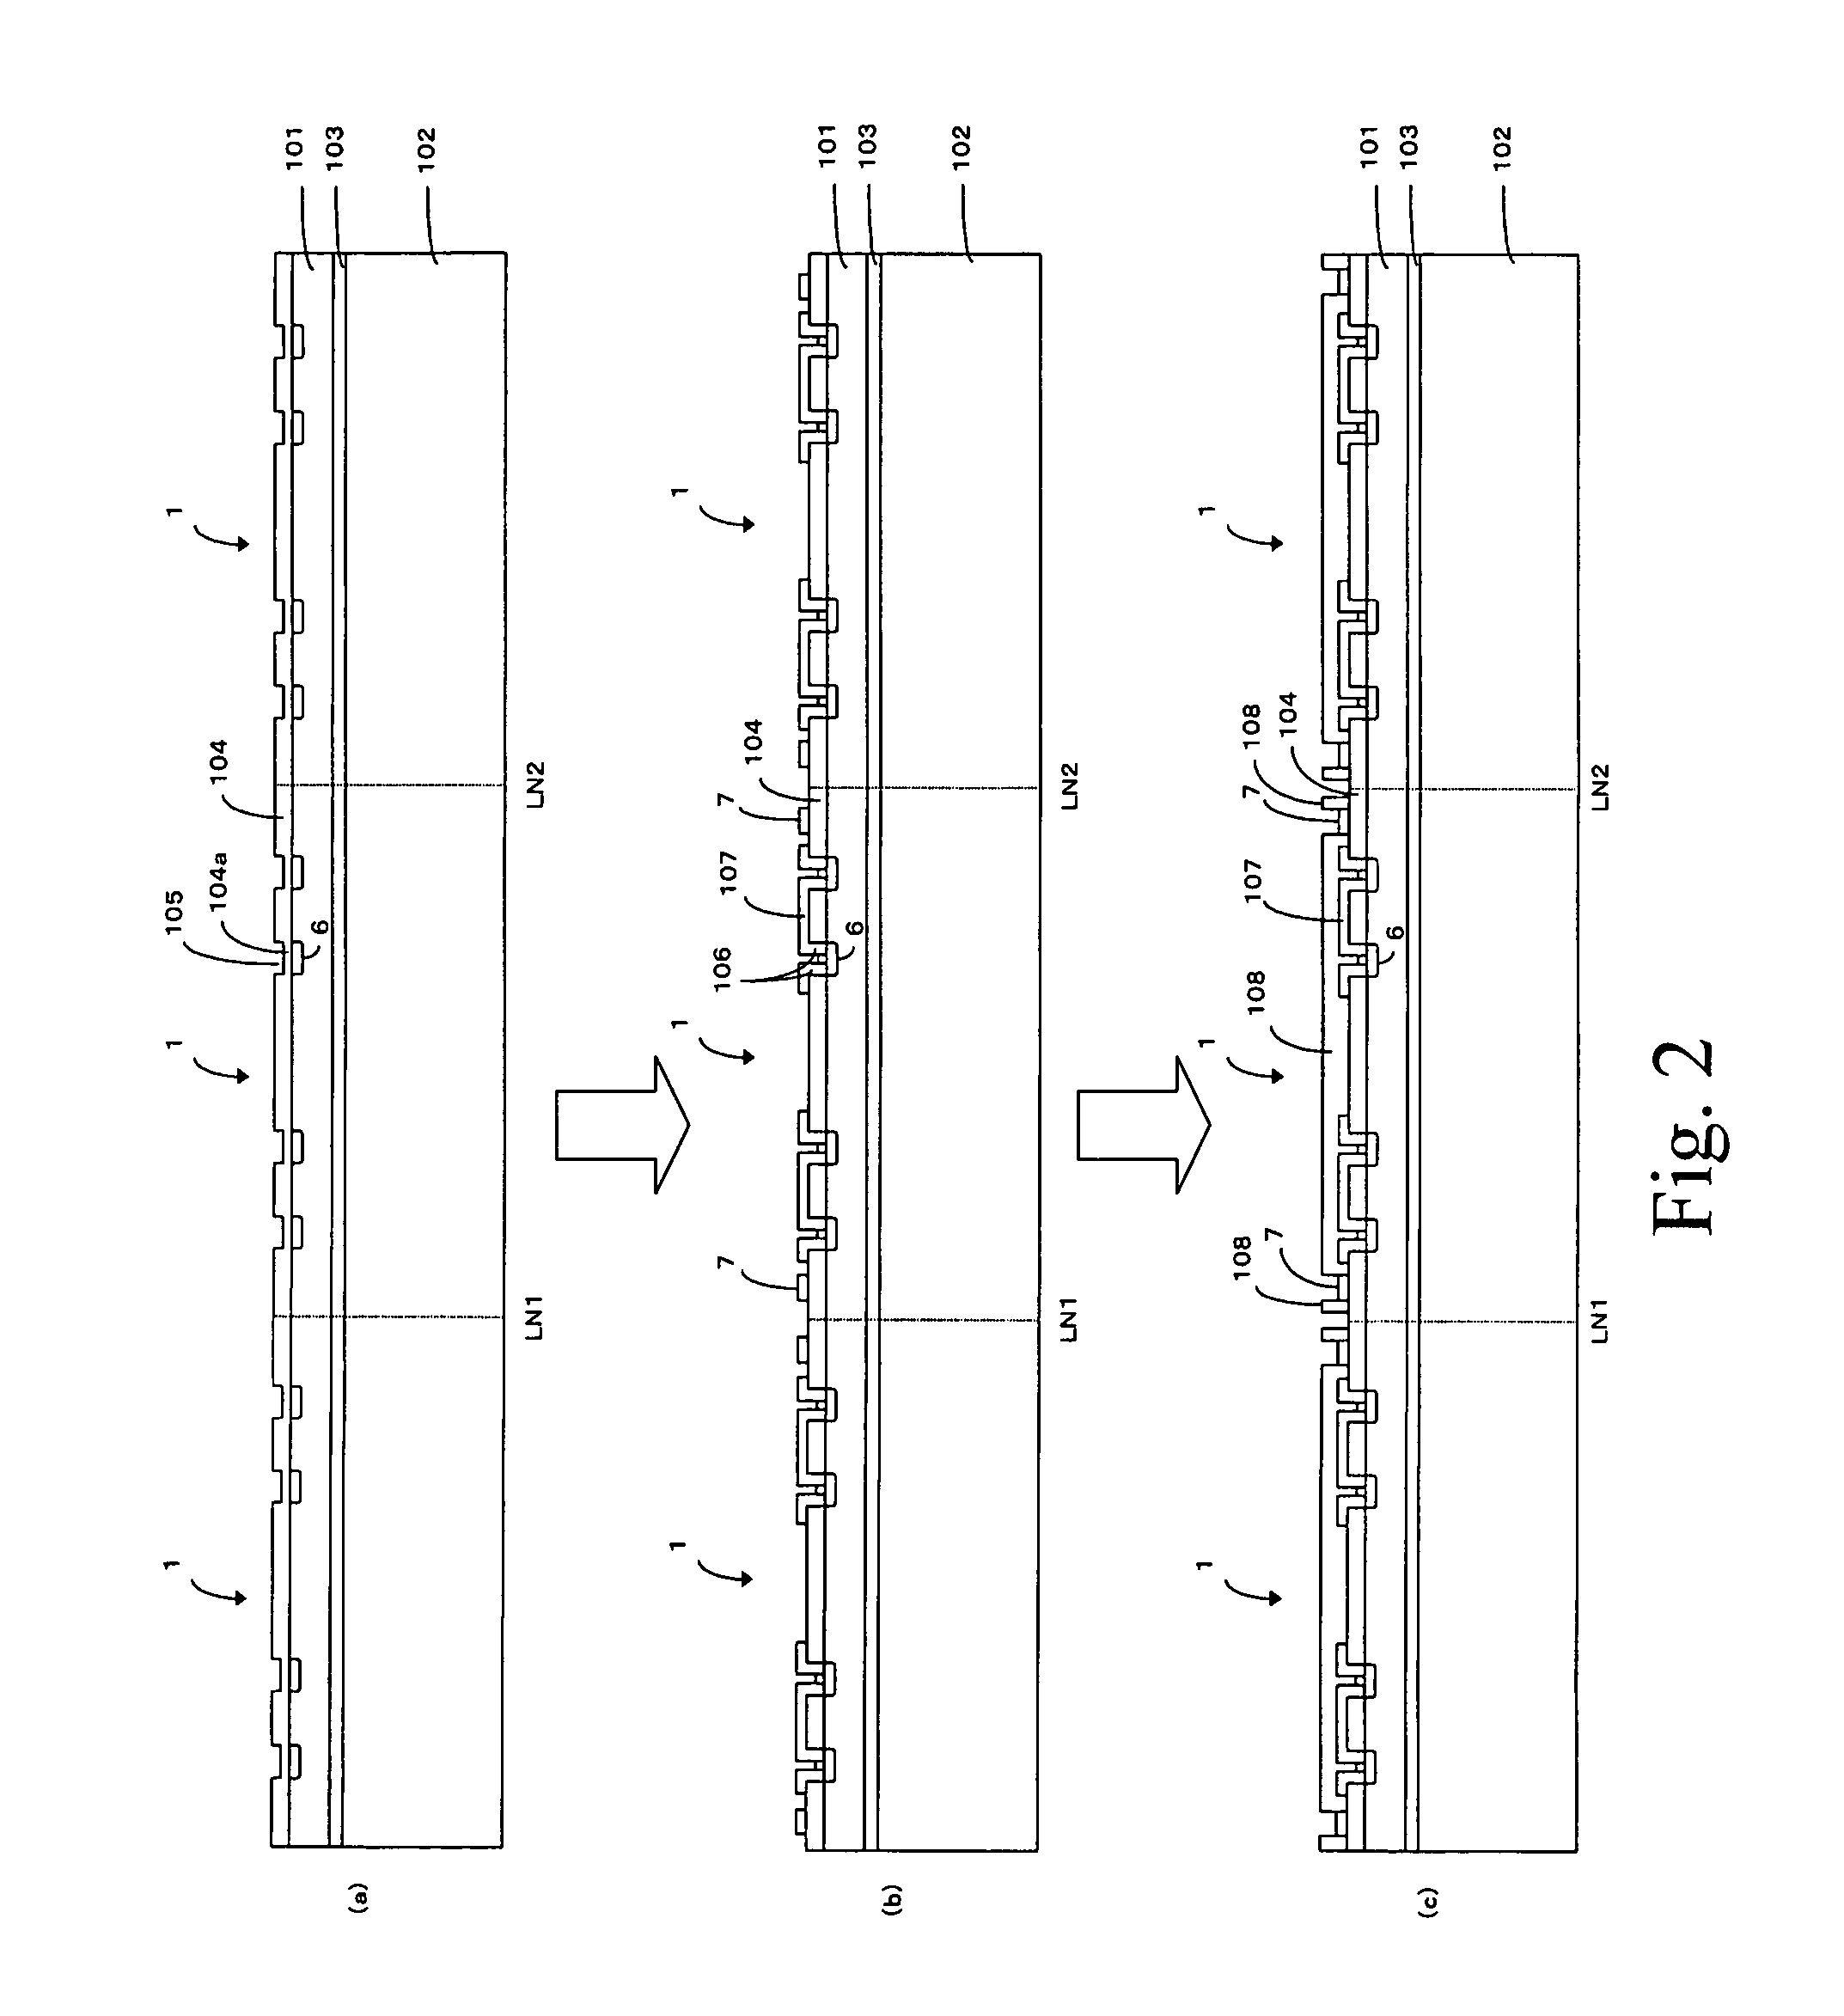 Method for forming individual semi-conductor devices